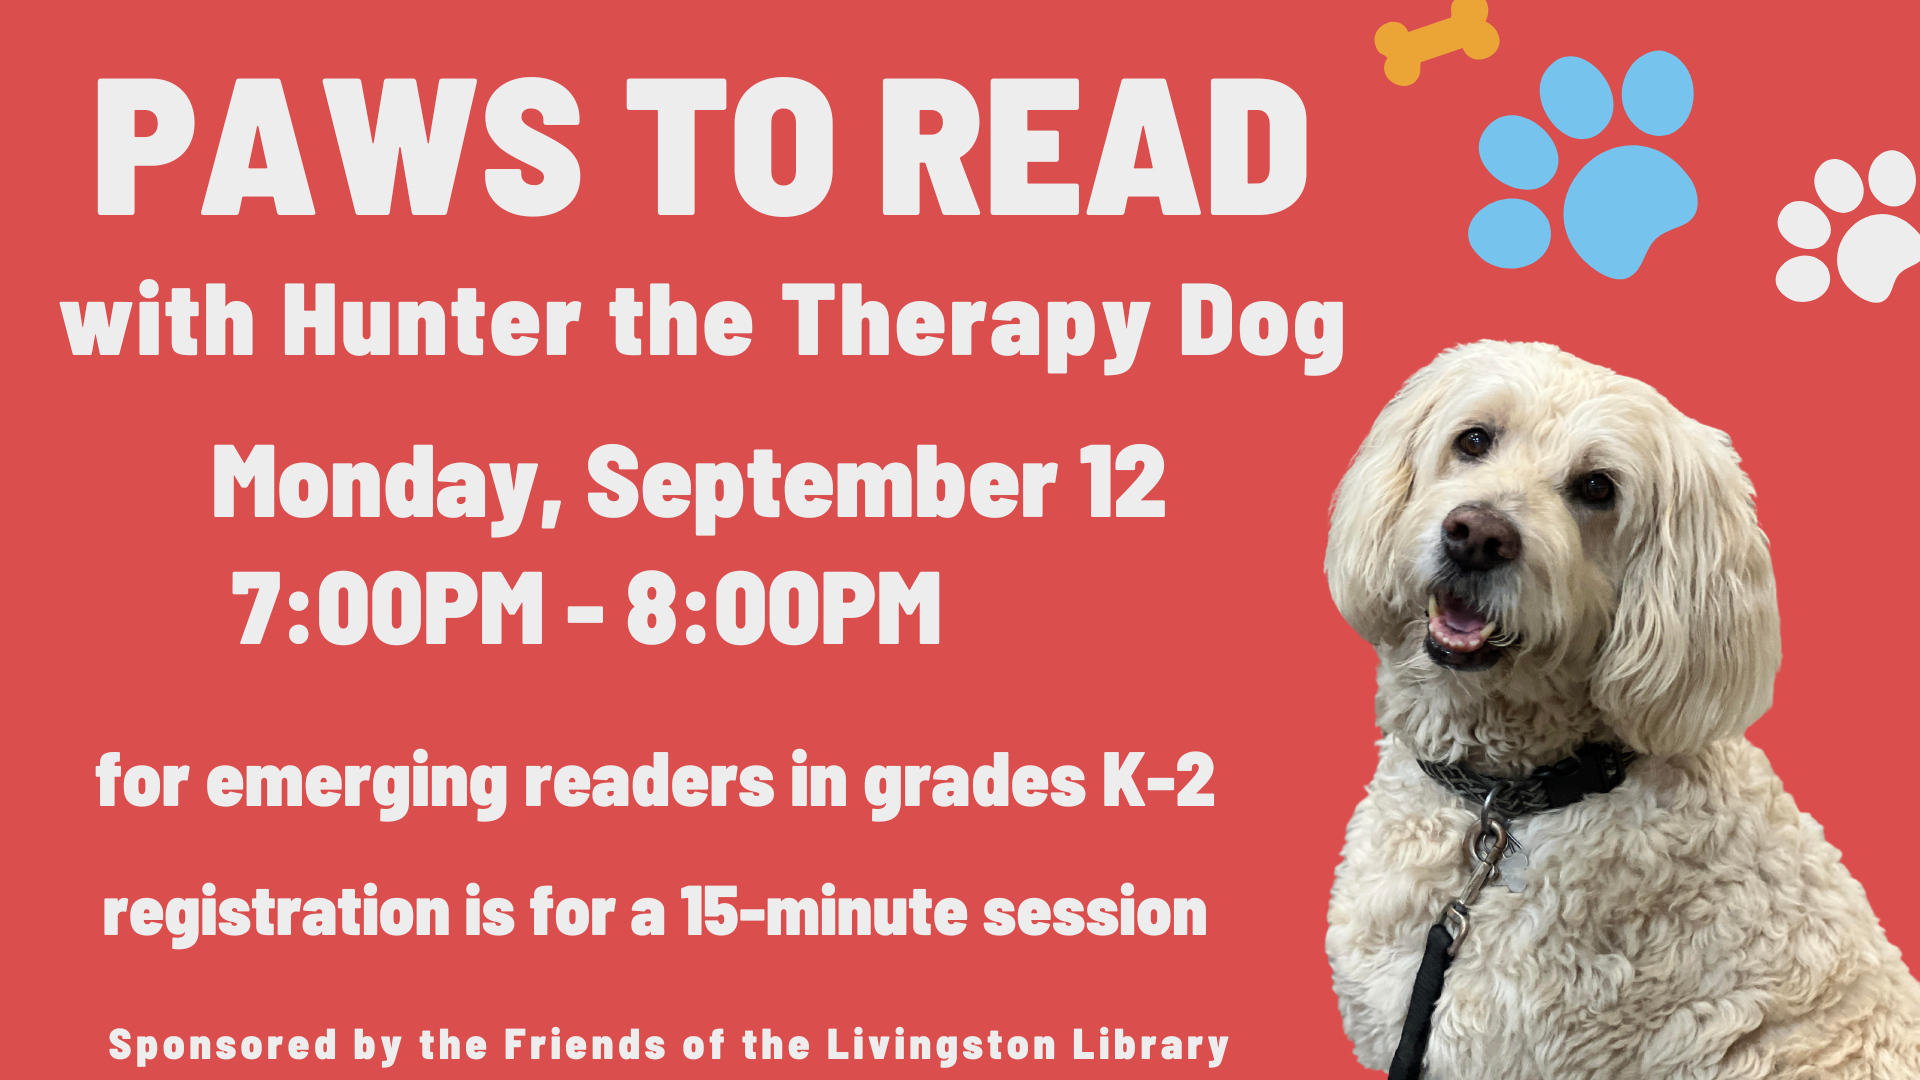 paws to read with hunter the therapy dog, with a picture of a golden doodle dog